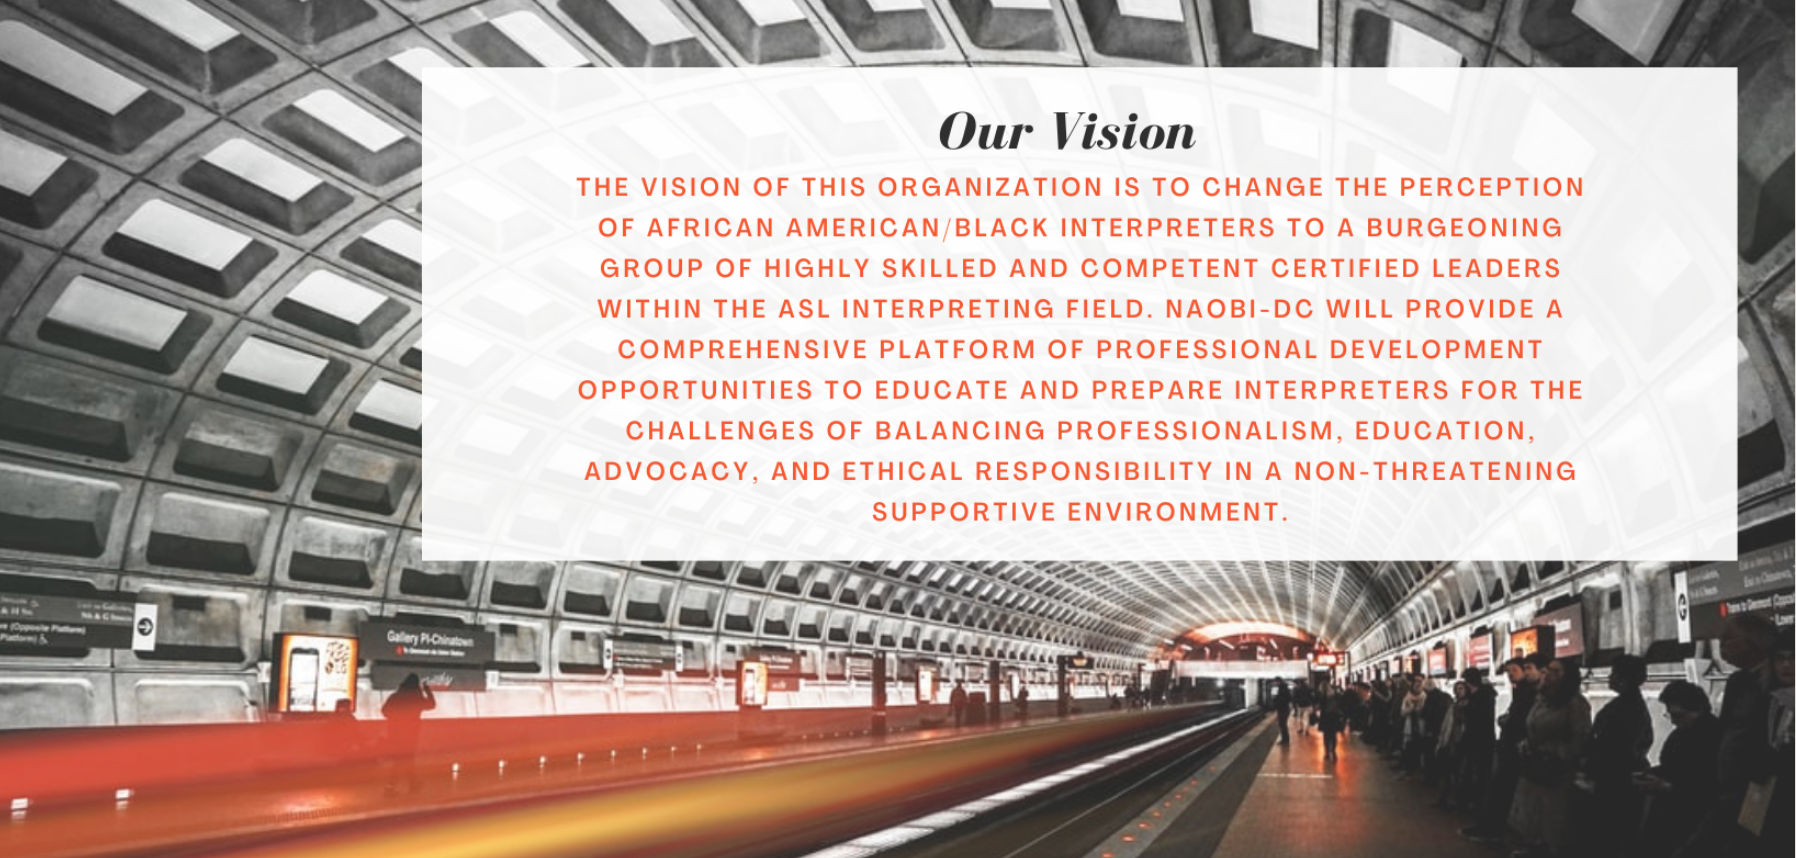 Our Vision- an Image background of the Gallery Place Metro tunnel. The arched ceiling is of cement tiles. There are blurred people and signs in the background. A stream of red and orange light symbolizes the metro just having sped out of sight. Overlaid on the photo is a white banner with text that reads, “Our vision- The vision of this organization is to change the perception of African American/Black interpreters to a burgeoning group of highly skilled and competent certified leaders within the ASL interpreting field. NAOBI-DC will provide a comprehensive platform of professional development opportunities to educate and prepare interpreters for the challenges of balancing professionalism, education, advocacy, and ethical responsibility in a non-threatening supportive environment.” 